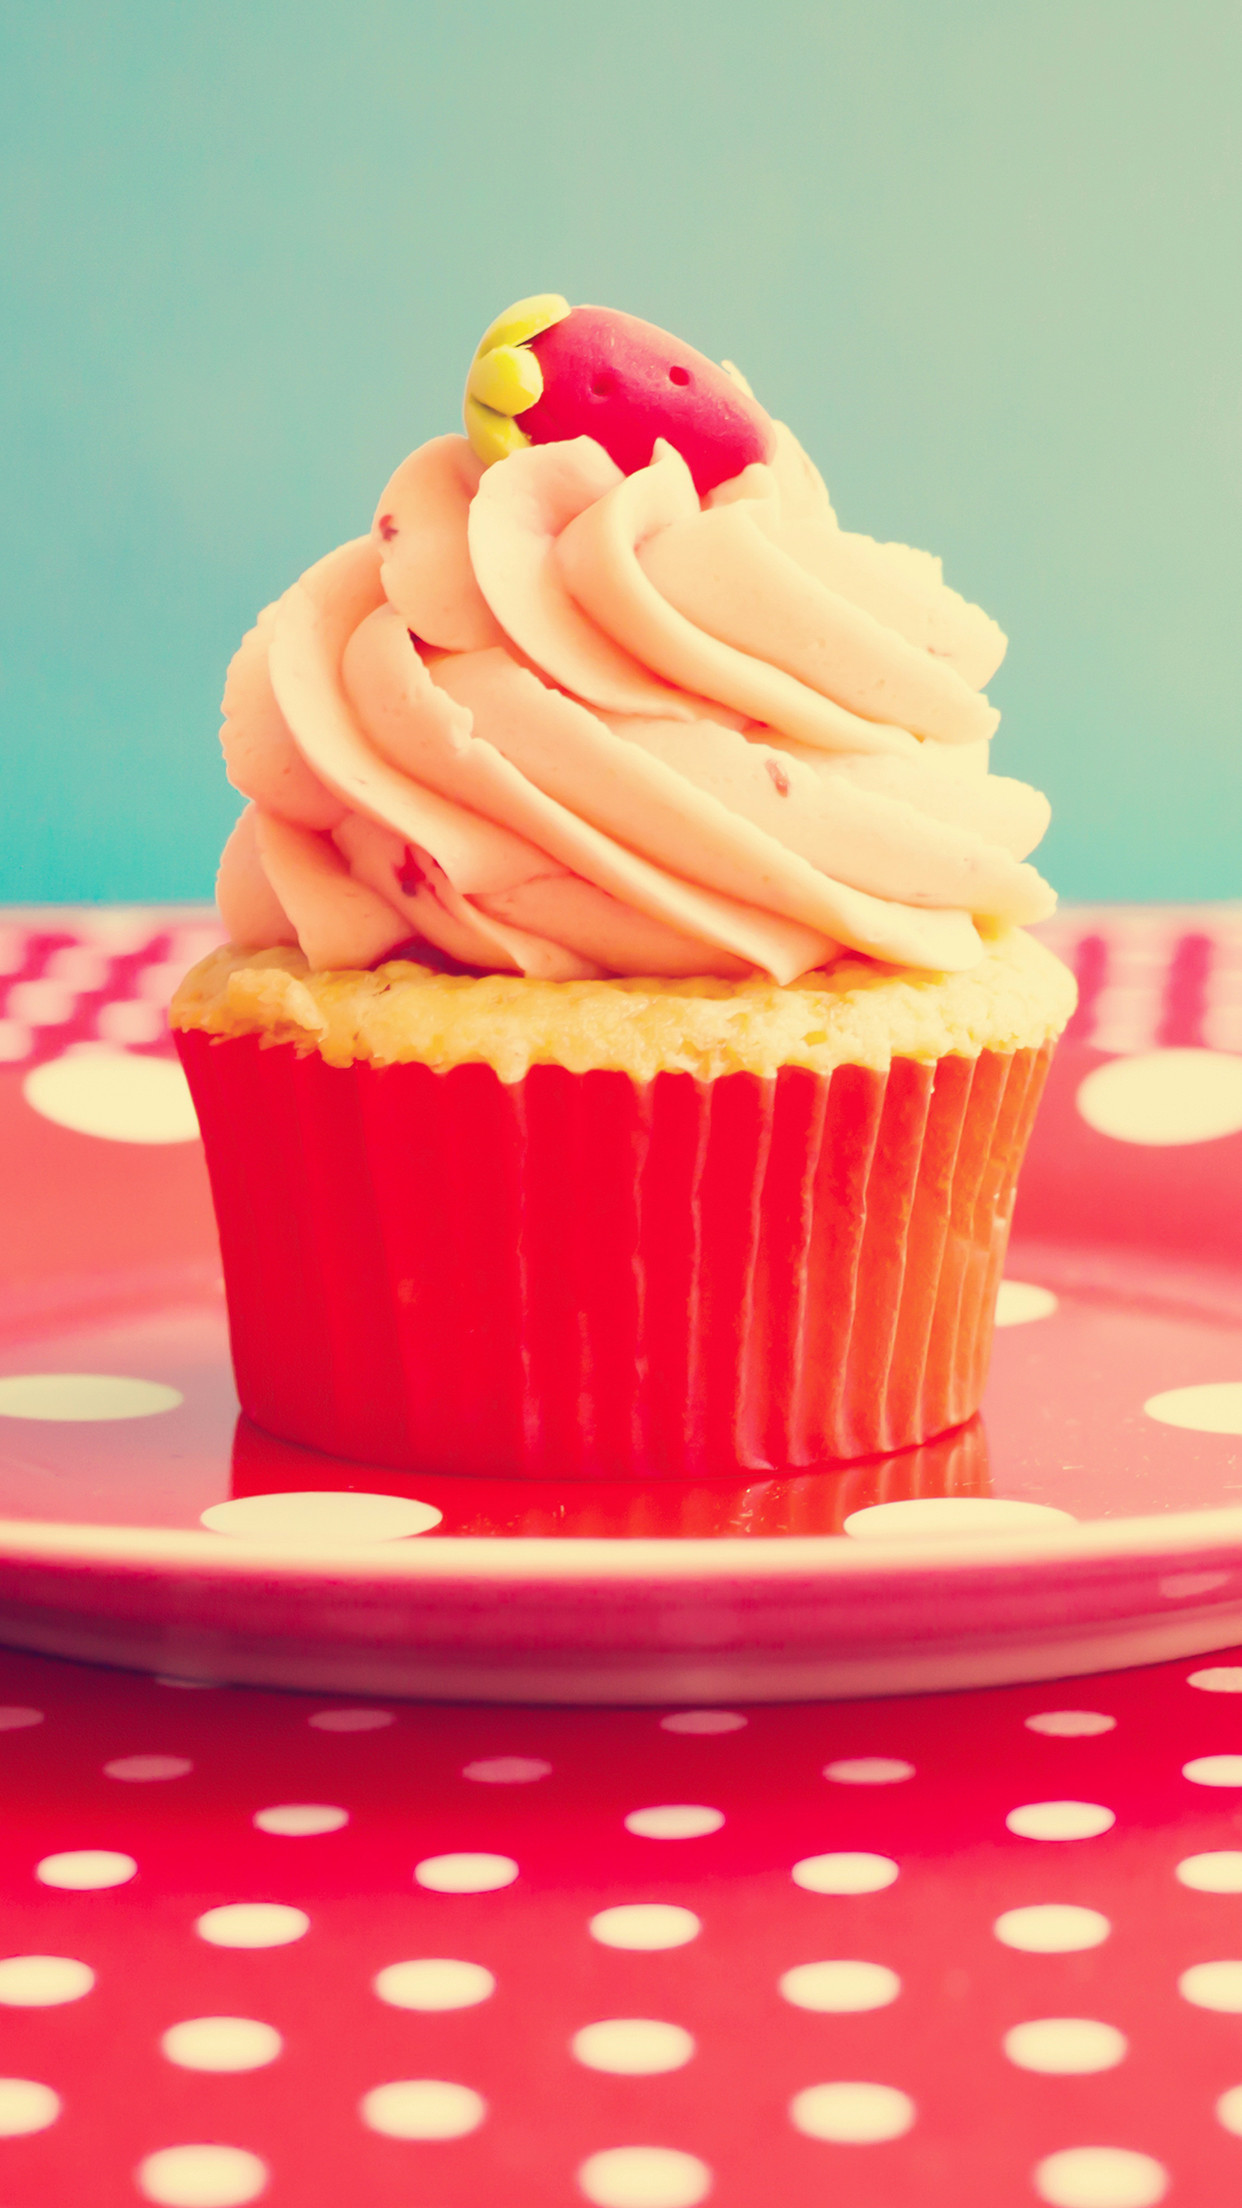 1242x2208 3Wallpapers | Best Wallpapers for all iPhone Retina Â» Cupcake Vintage